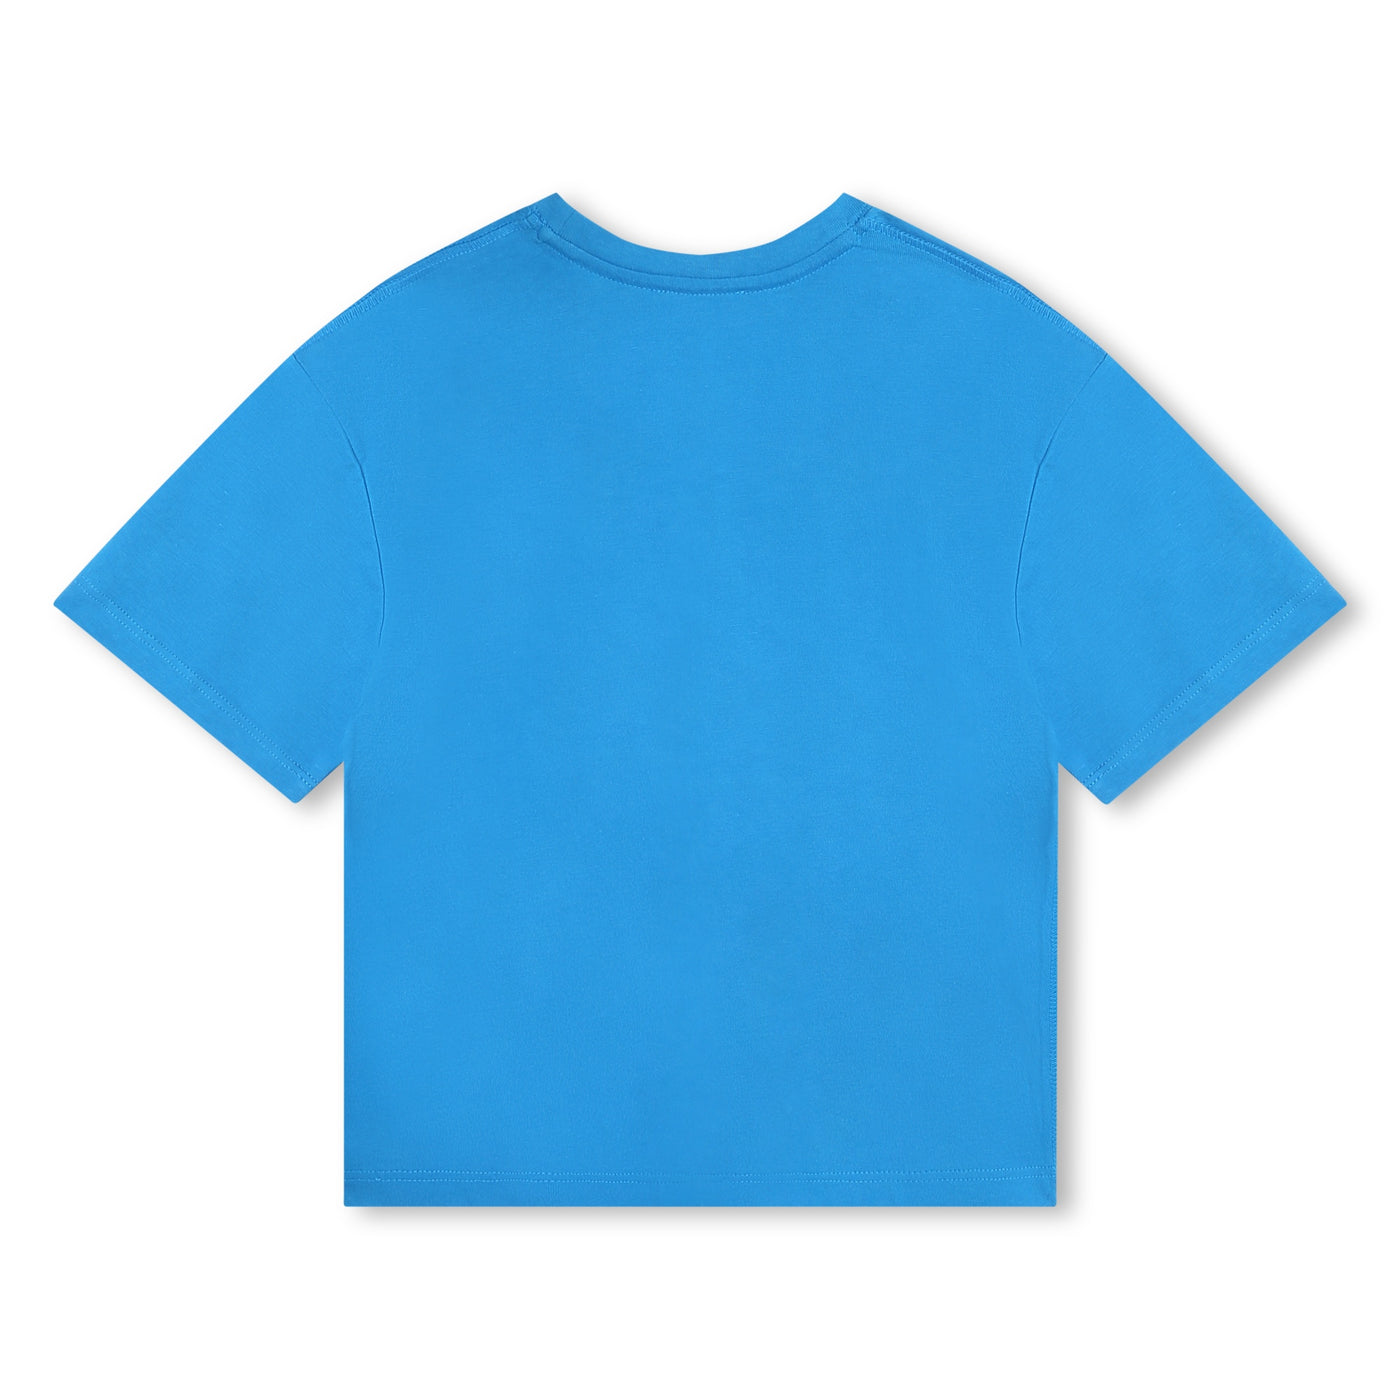 Electric Blue T-shirt by Marc Jacobs